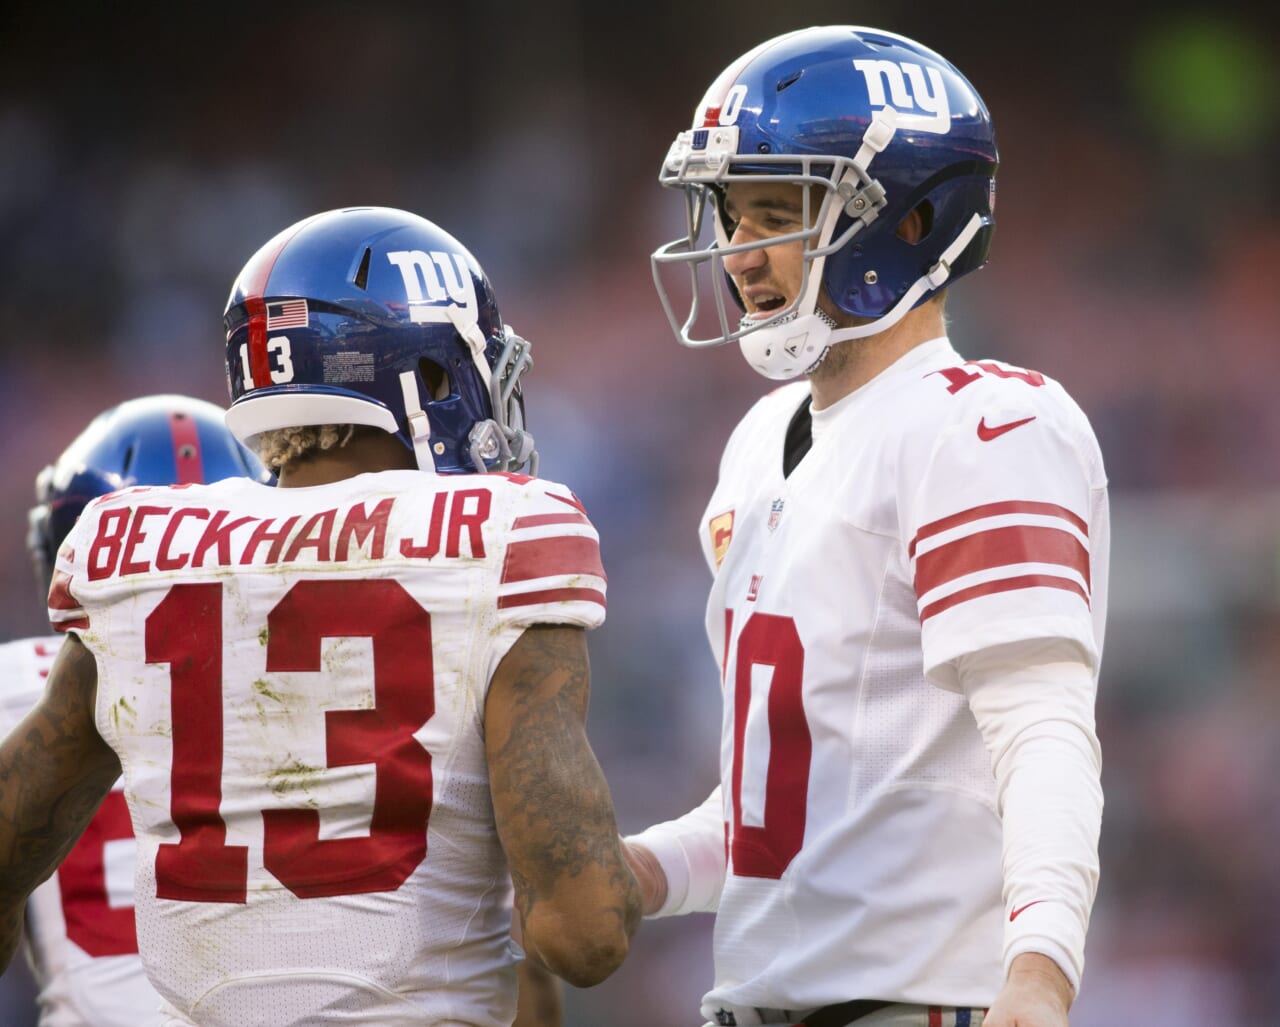 Odell Beckham: “Feels Like I Can Go For A Thousand Yards”